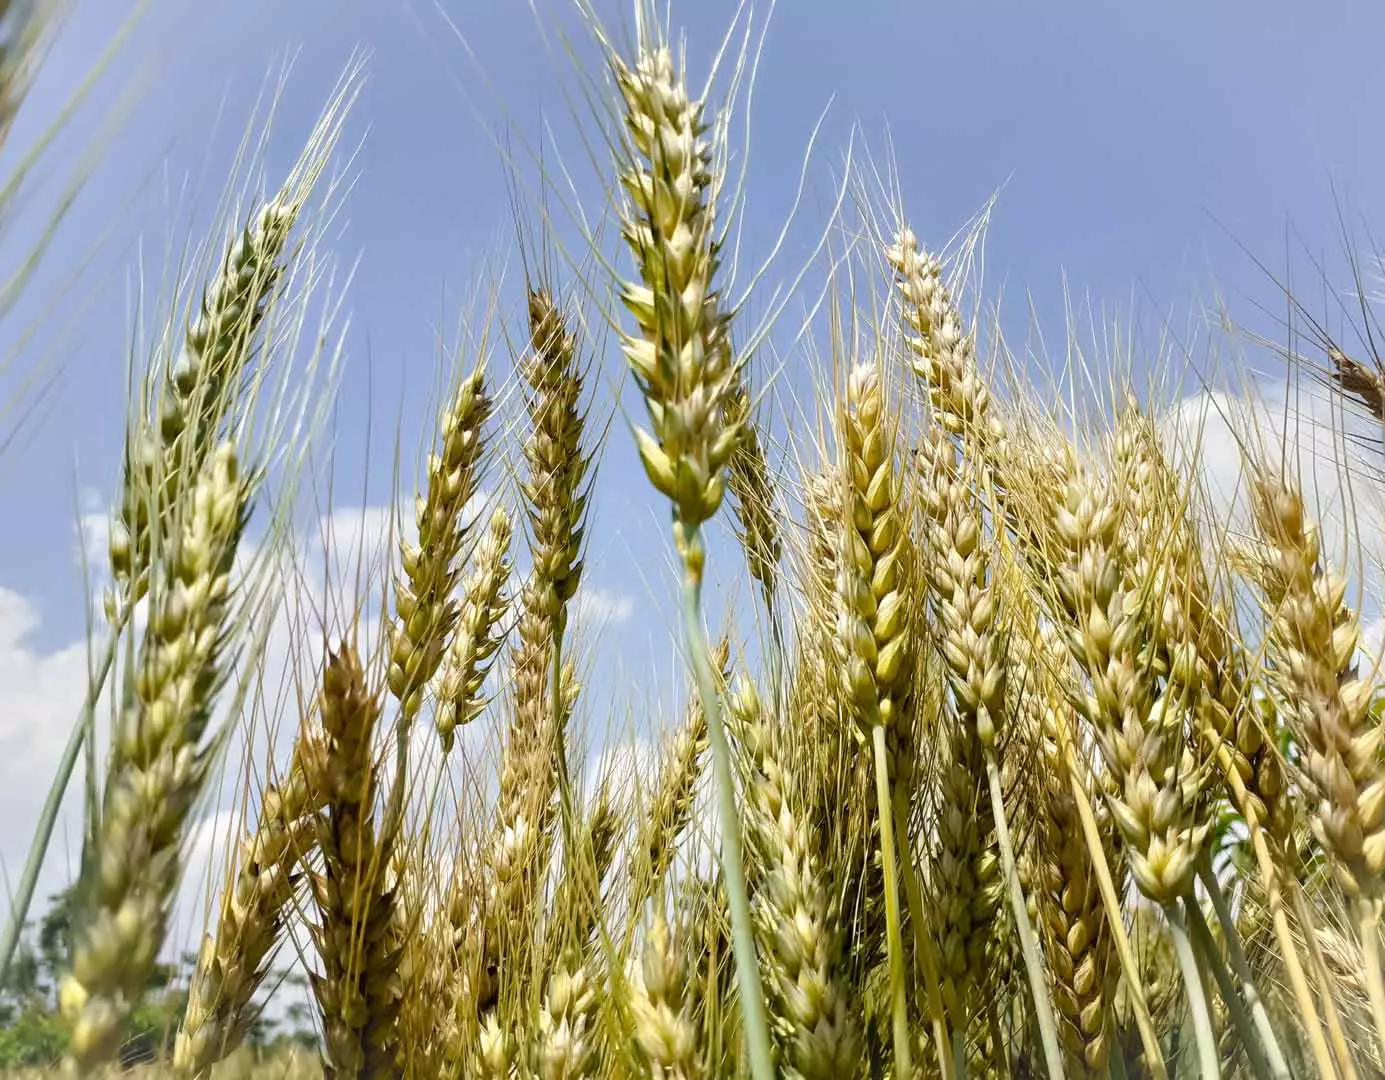 Wheat crop close up green and mature with blue and cloudy sky background